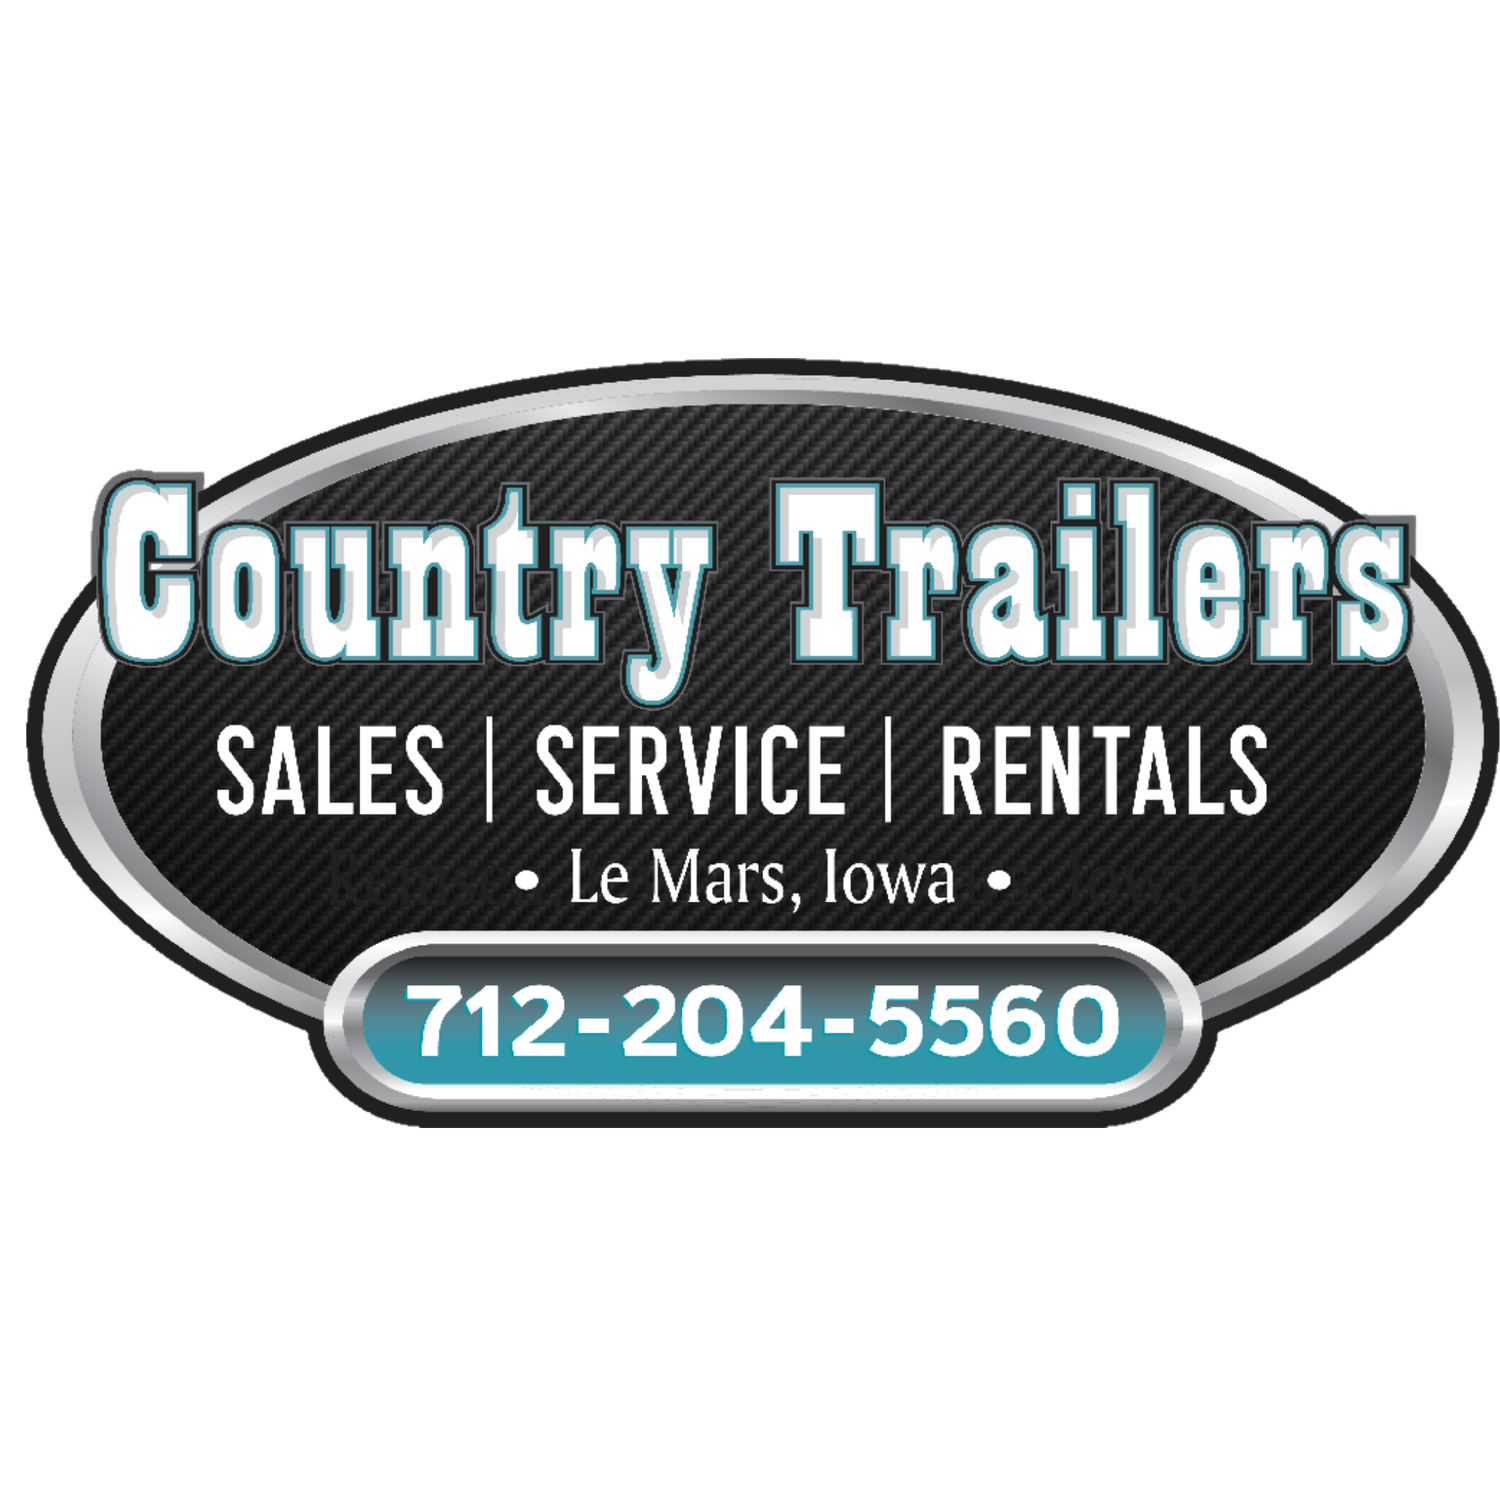 Country Trailers Sales Service Rentals